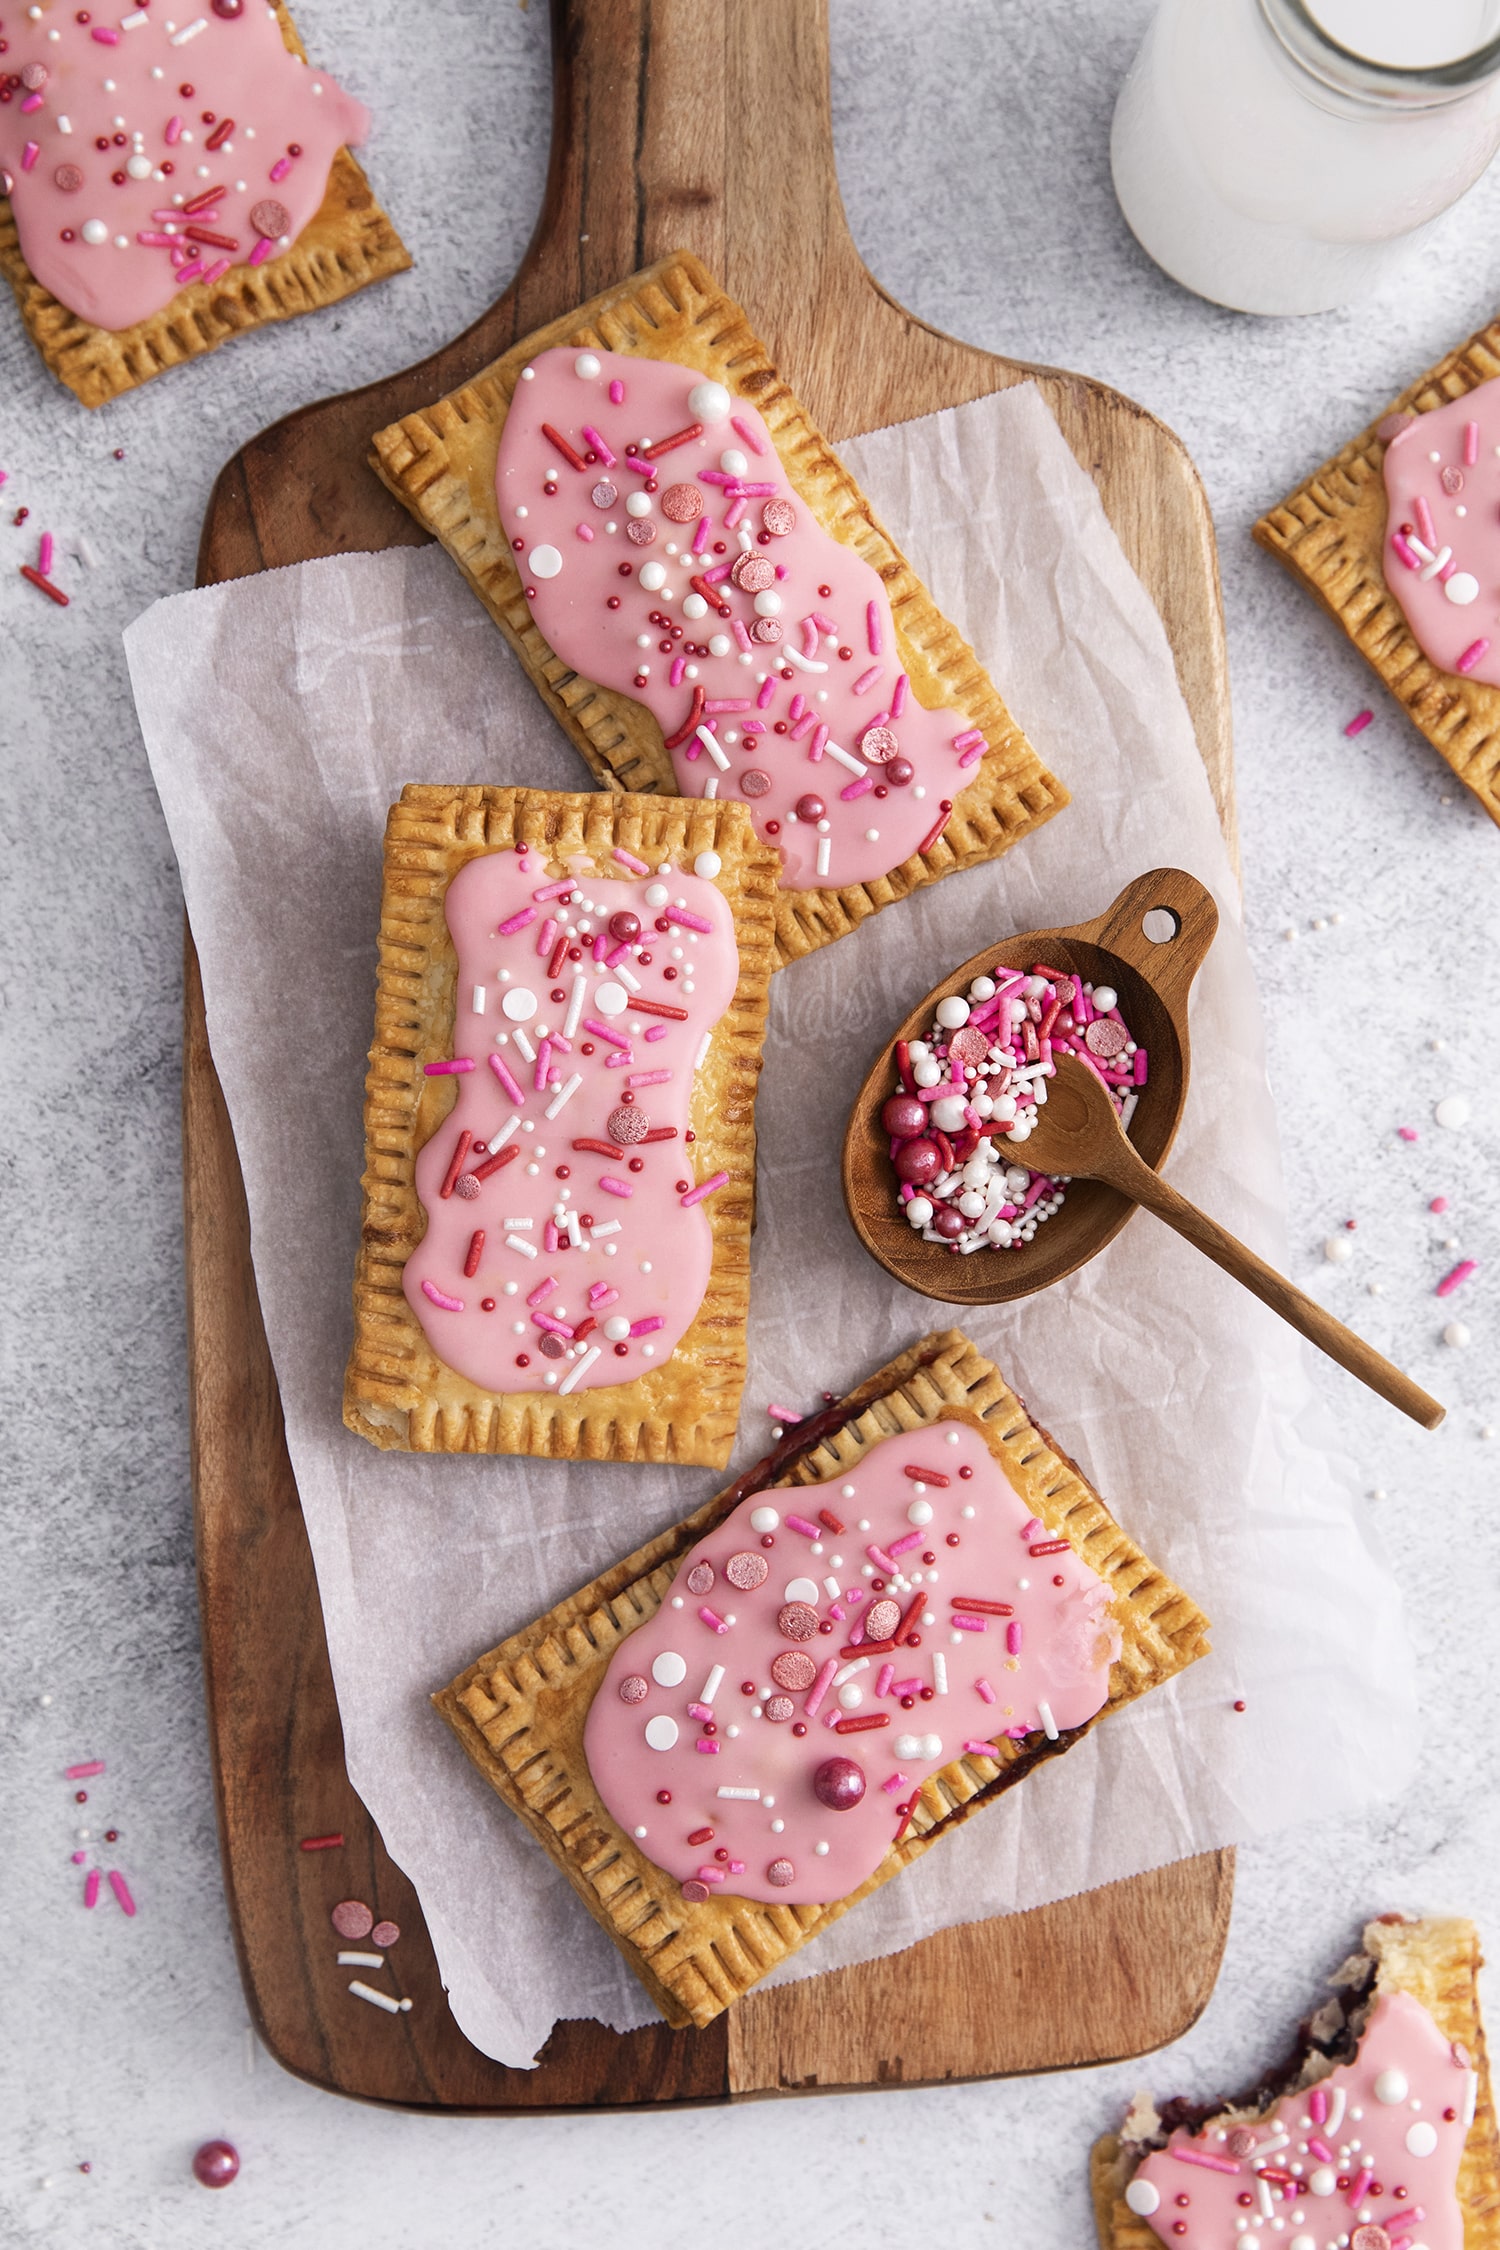 a large wooden board holding homemade air fried pop tarts covered in pink sugar glaze and fun spinkles.